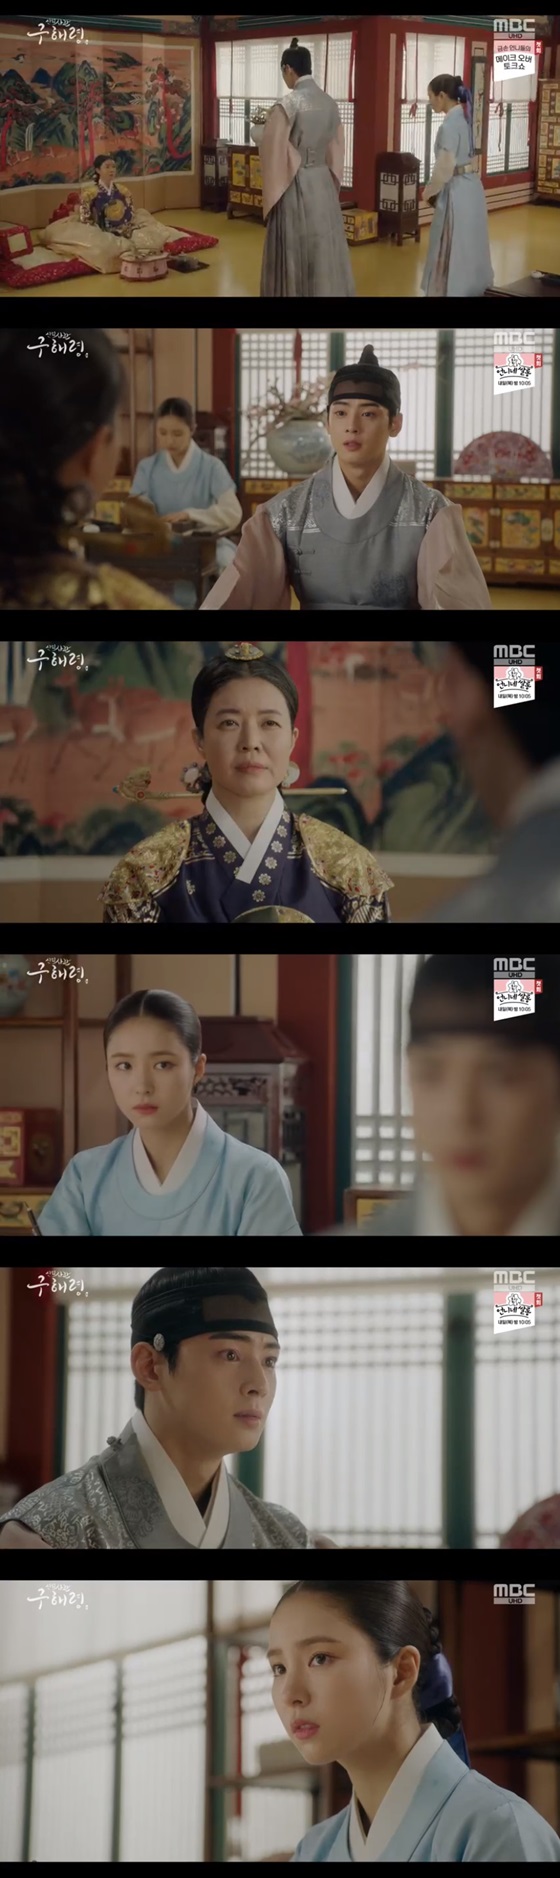 Cha Eun-woo Confessions to Kim Yeo-jin that he has a beloved GLOWThe MBC drama The New Entrepreneur Rookie Historian Goo Hae-ryung (playplayed by Kim Ho-soo, directed by Kang Il-soo and Han Hyun-hee, produced by Green Snake Media) broadcasted on the afternoon of the 4th depicted the story of Lee Rim (Cha Eun-woo), who asked for the collection of the Gantaekryeong.On the same day, Ju Sang Lee (Kim Min-sang) met with Dae-Ji (Kim Yeo-jin) and asked him to allow Lee Lim to marry.In response, the Garye government office was established and Bongdan-ryeong (ordered to present a Sajudanja for the house) was issued.Rookie Historian Goo Hae-ryung (Shin Se-kyung), who heard the news, said to Irim with a faceless face, I am reducing it, he said. Did not you want to live in Saga for a long time?Irim said, I will not marry anyone other than you. However, Rookie Historian Goo Hae-ryung asked, If you are like your boss, should you live in the script for the rest of your life?Lee visited the museum and called Rookie Historian Goo Hae-ryung out.He told the contrast in front of Rookie Historian Goo Hae-ryung, I have a request for Mama.Please stop the marriage and stop the marriage. I already have a GLOW that I like.I do not want anyone else who is not GLOW because I am deeply loving. To have courageous Confessions for a loved one.This ending wonders whether the preparation will know the existence of Rookie Historian Goo Hae-ryung, and what trials will be waiting for Rookie Historian Goo Hae-ryung and Irim.